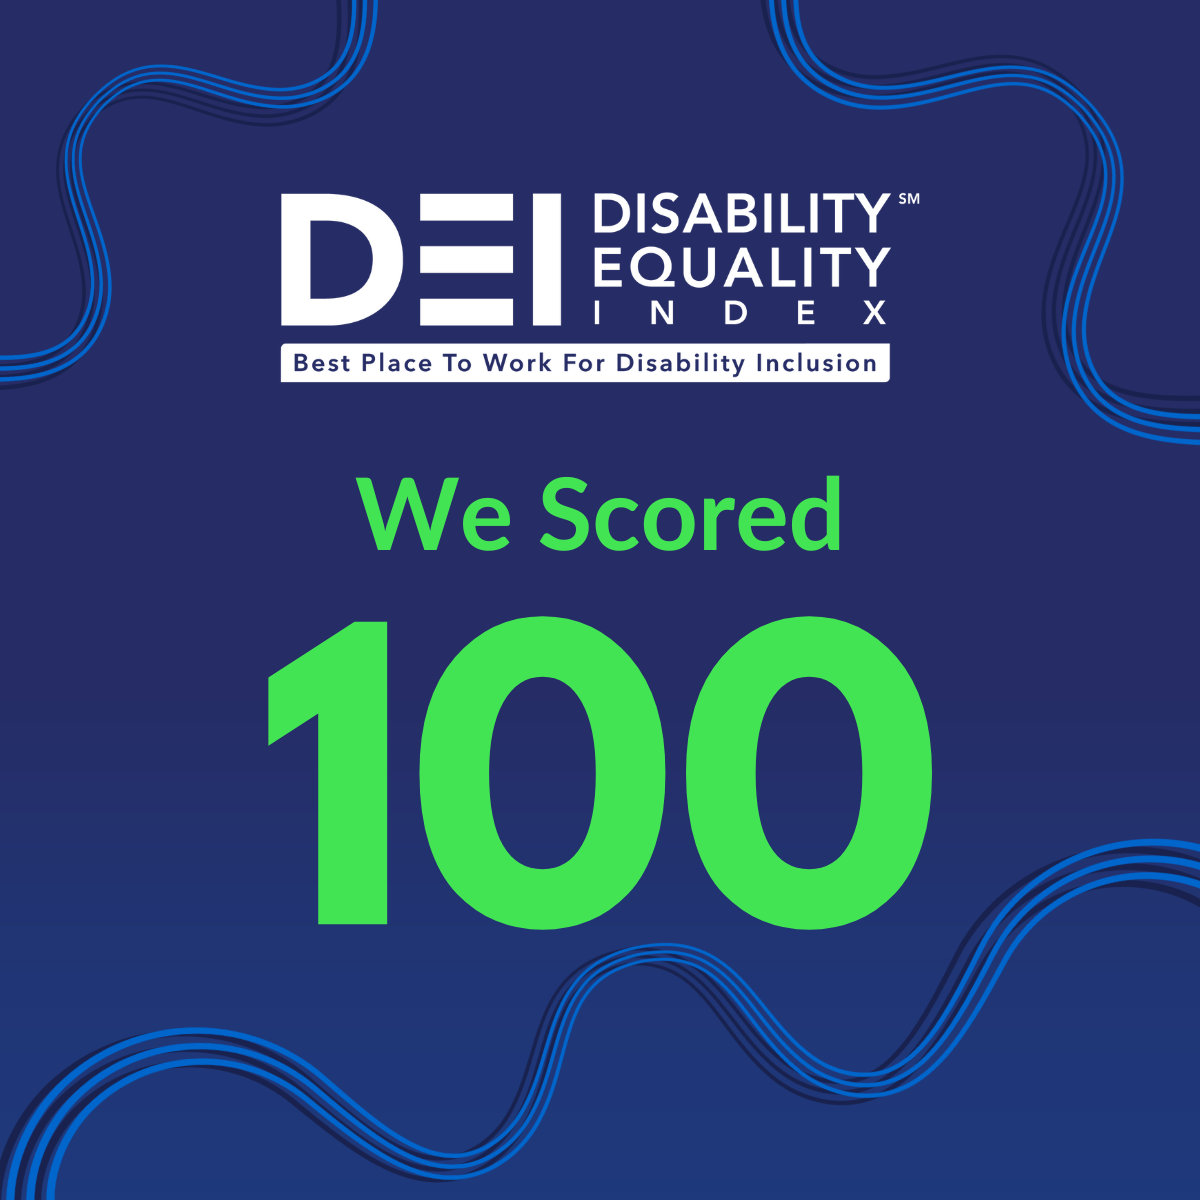 A dark blue card bears the Disability Equality Index logo with the tagline Best Place to Work for Disability Inclusion, declaring We Scored 100.